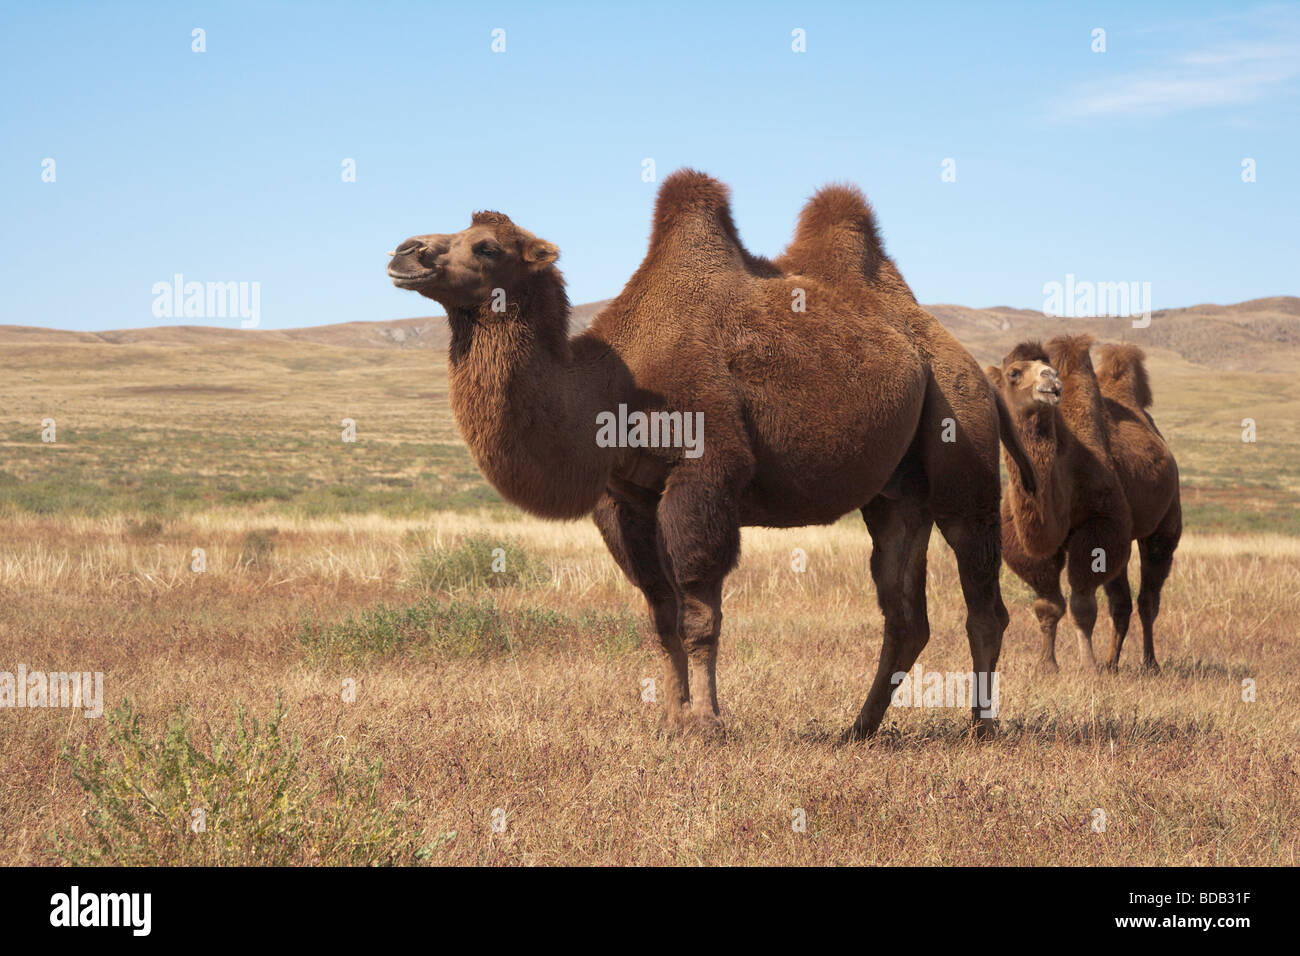 Two humped camels (Camelus bactrianus), north central Mongolia Stock Photo